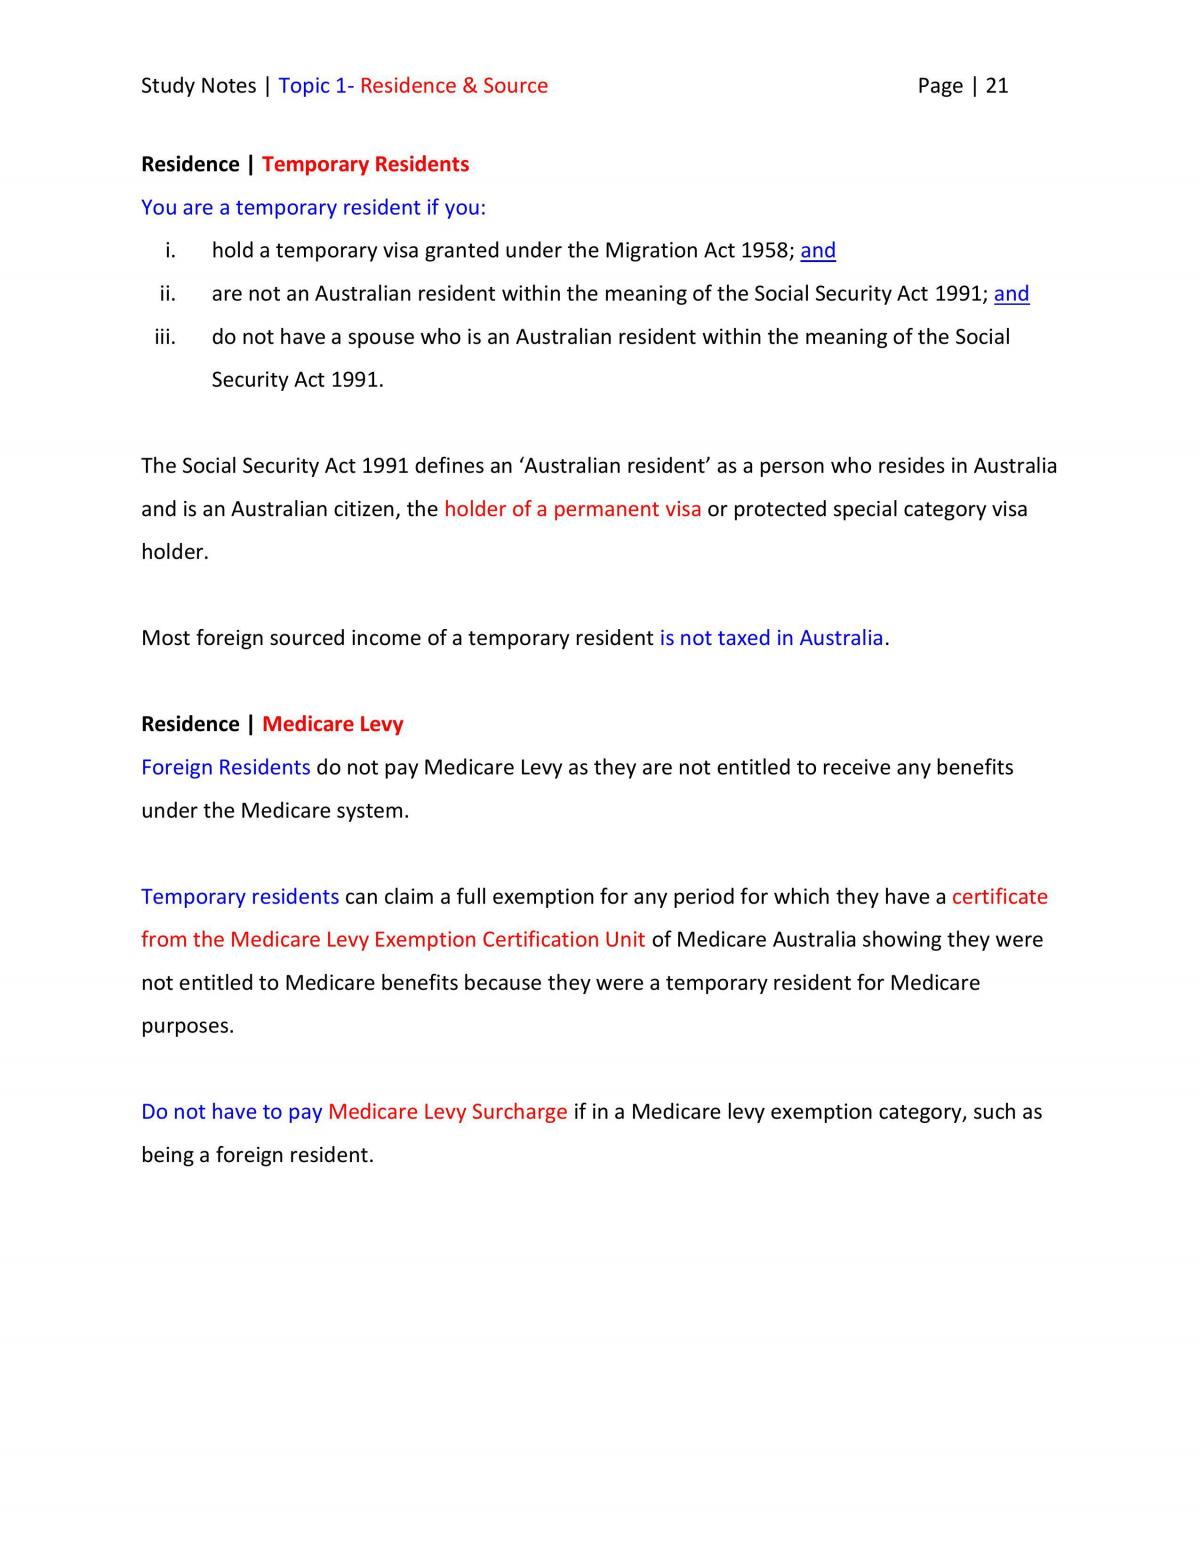 taxation law - Page 21